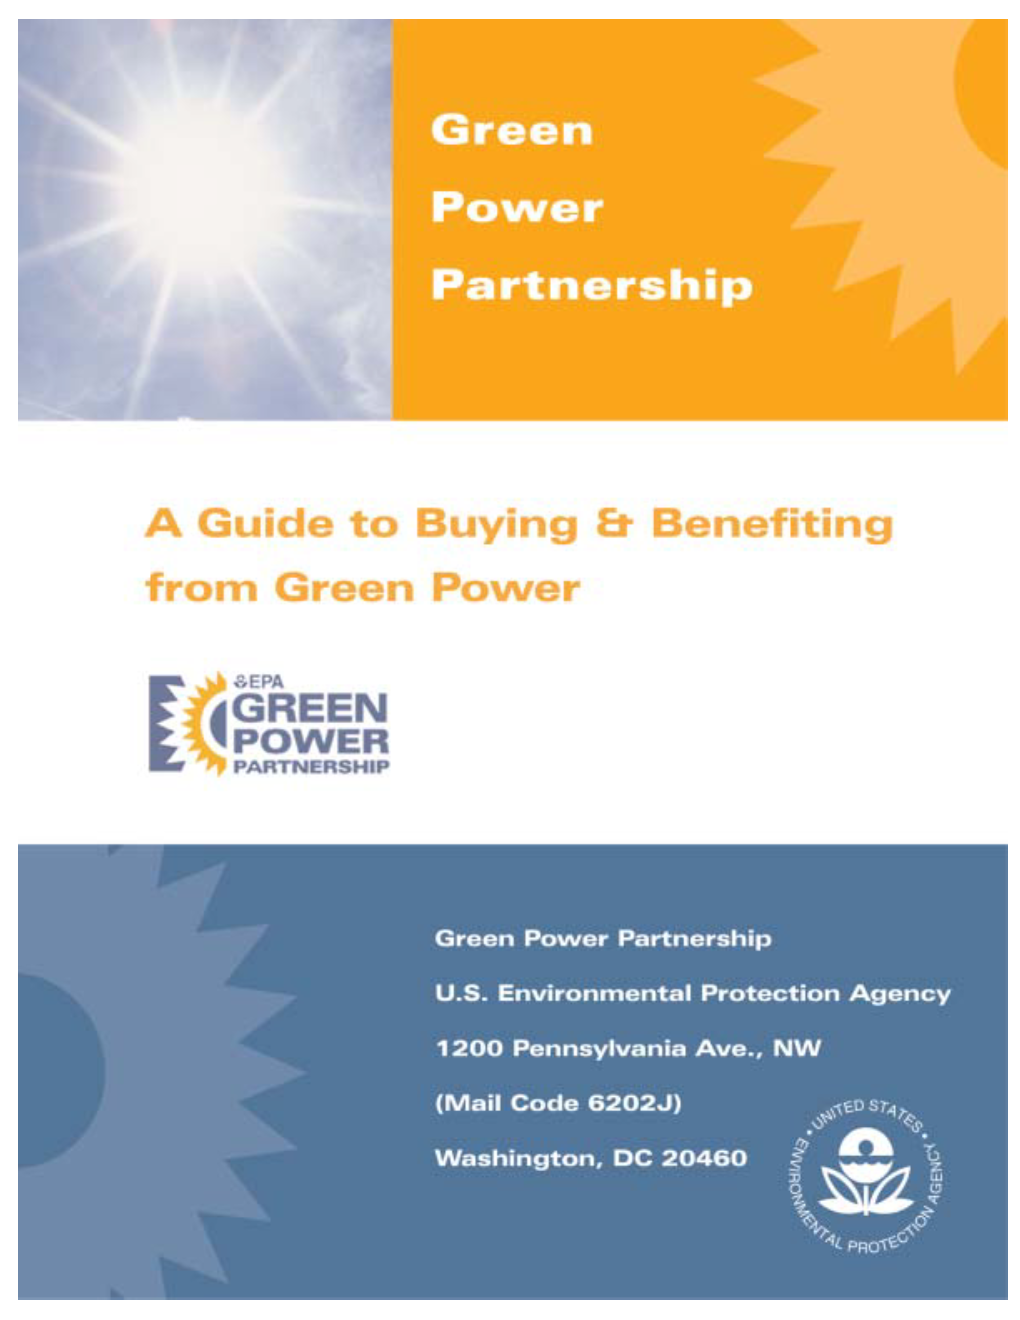 Green Power Partnership, a Guide to Buying & Benefiting from Green Power